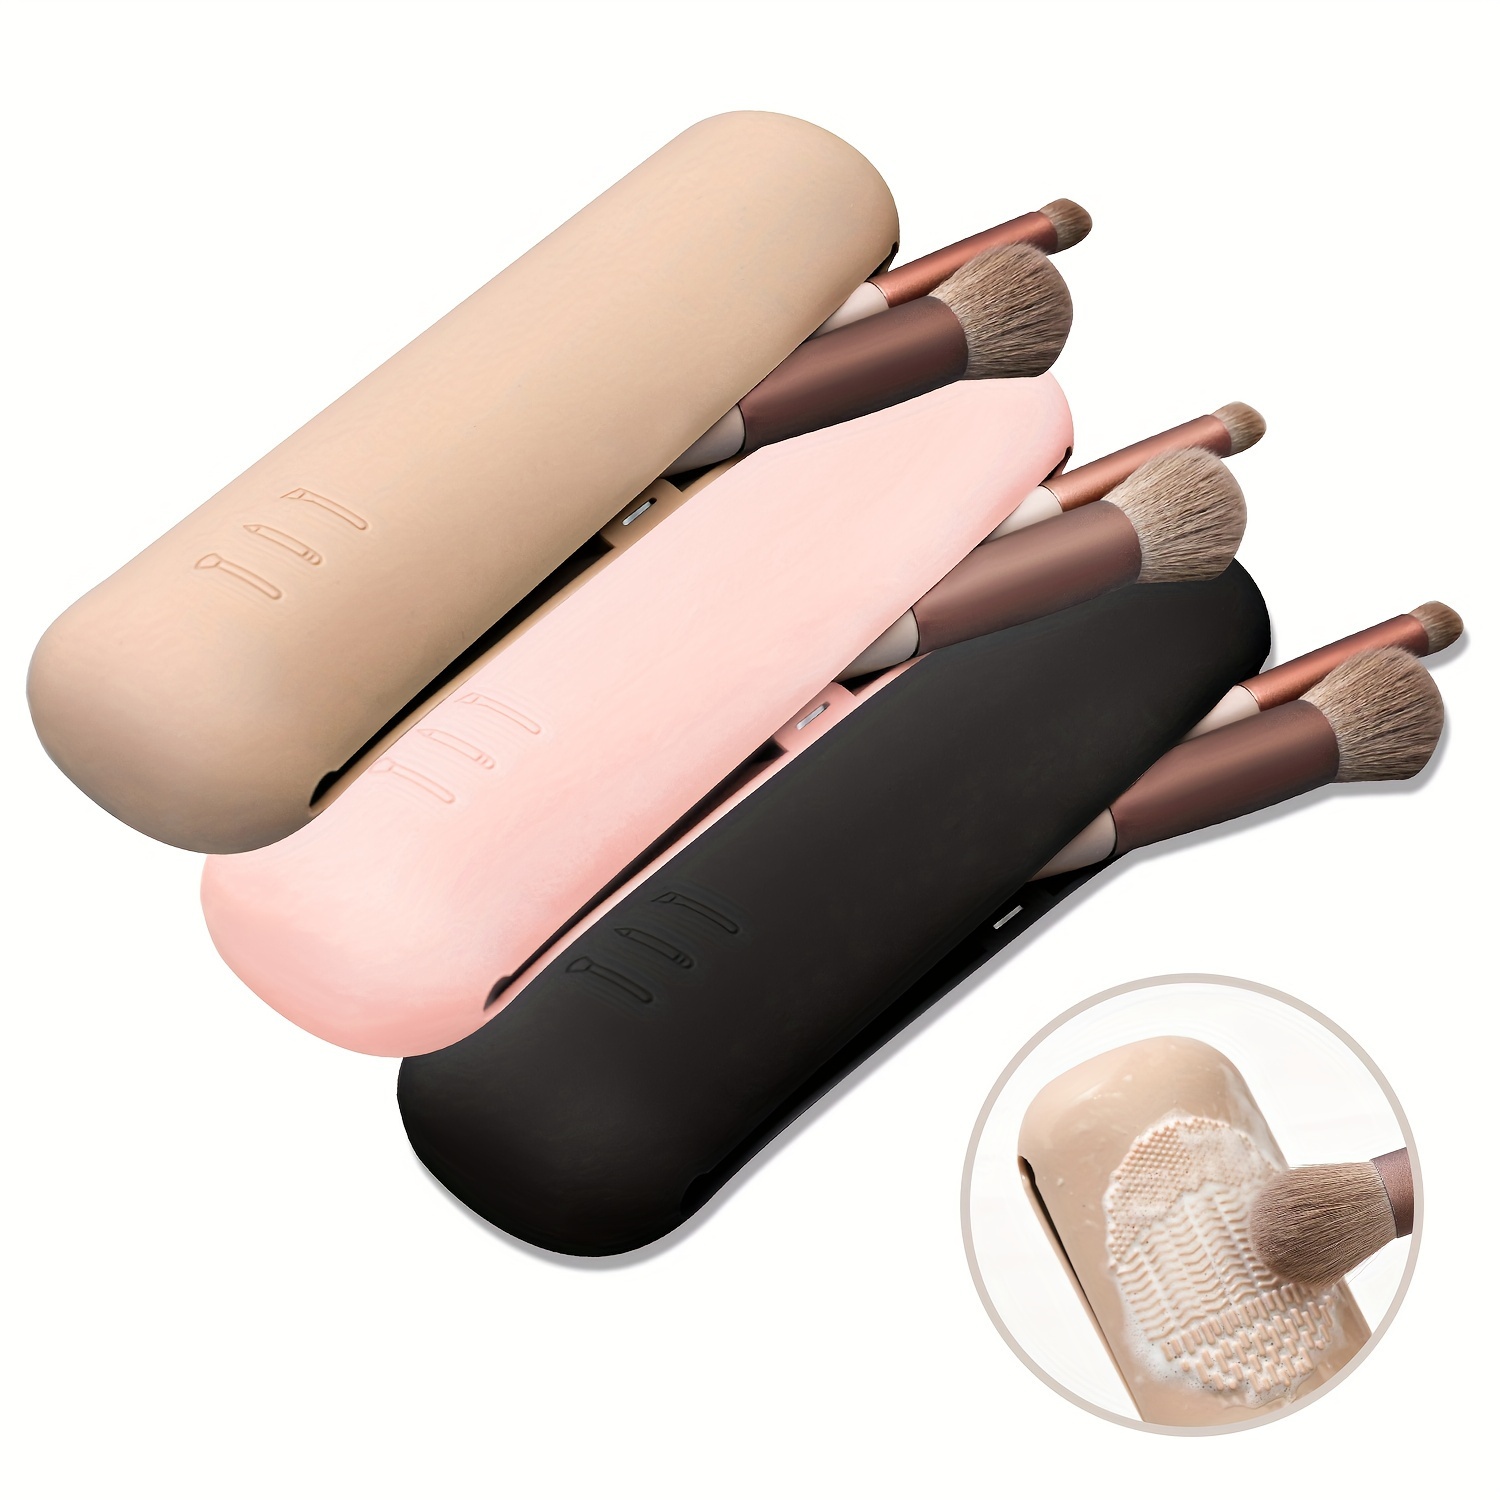 

Portable Silicone Makeup Brush Holder - Soft And Stylish Travel Organizer For Makeup Tools